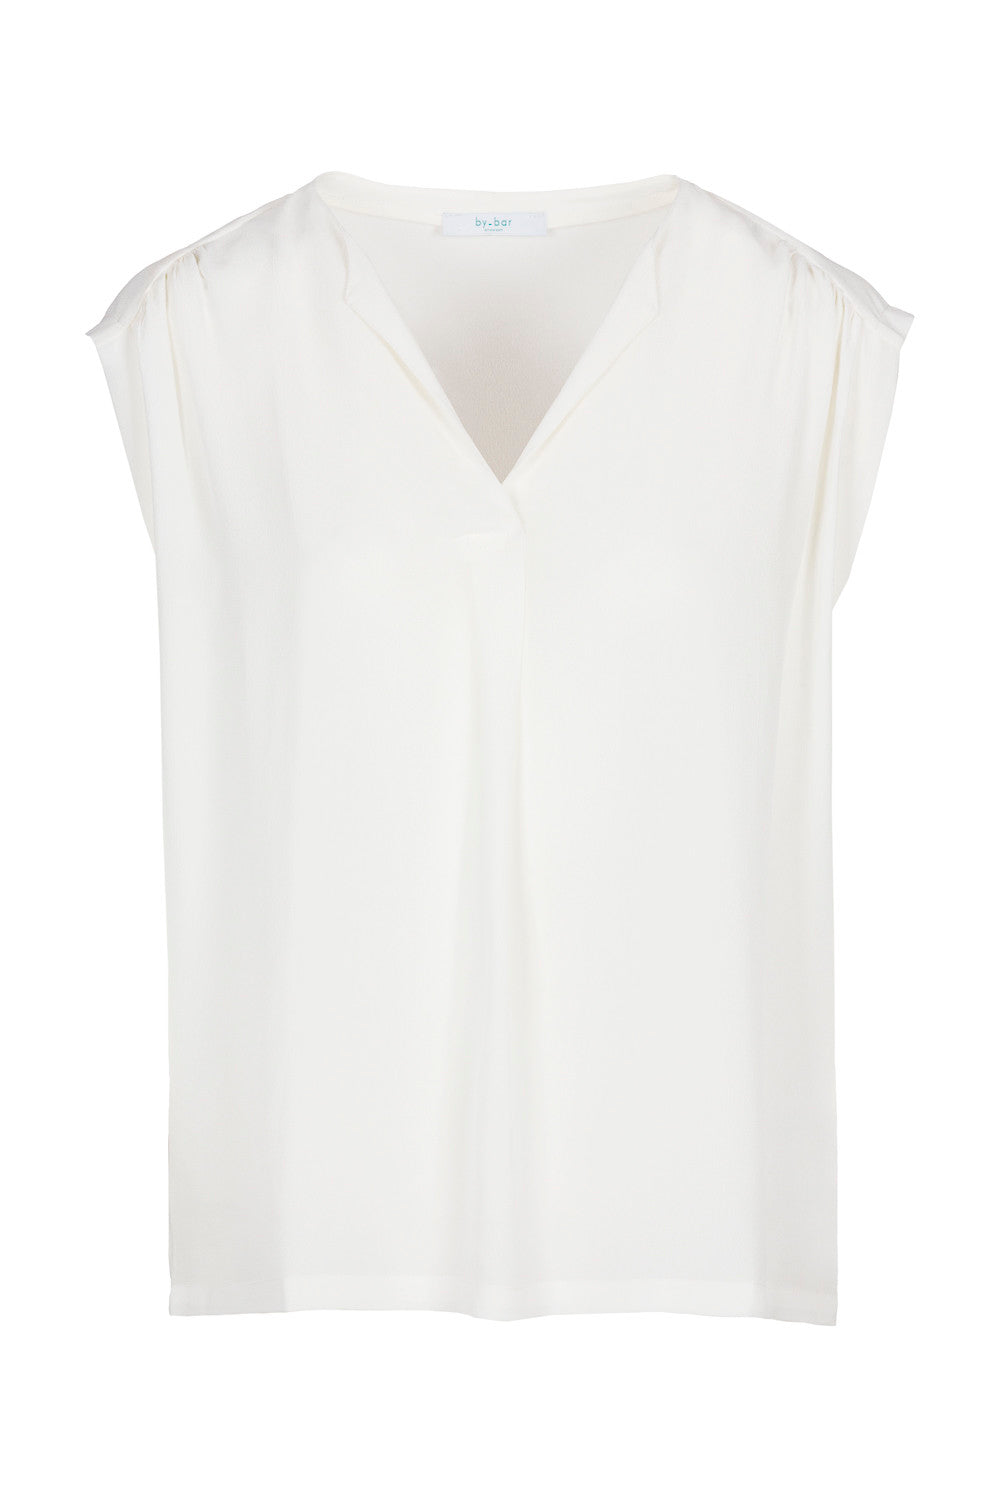 By-Bar - star top off white